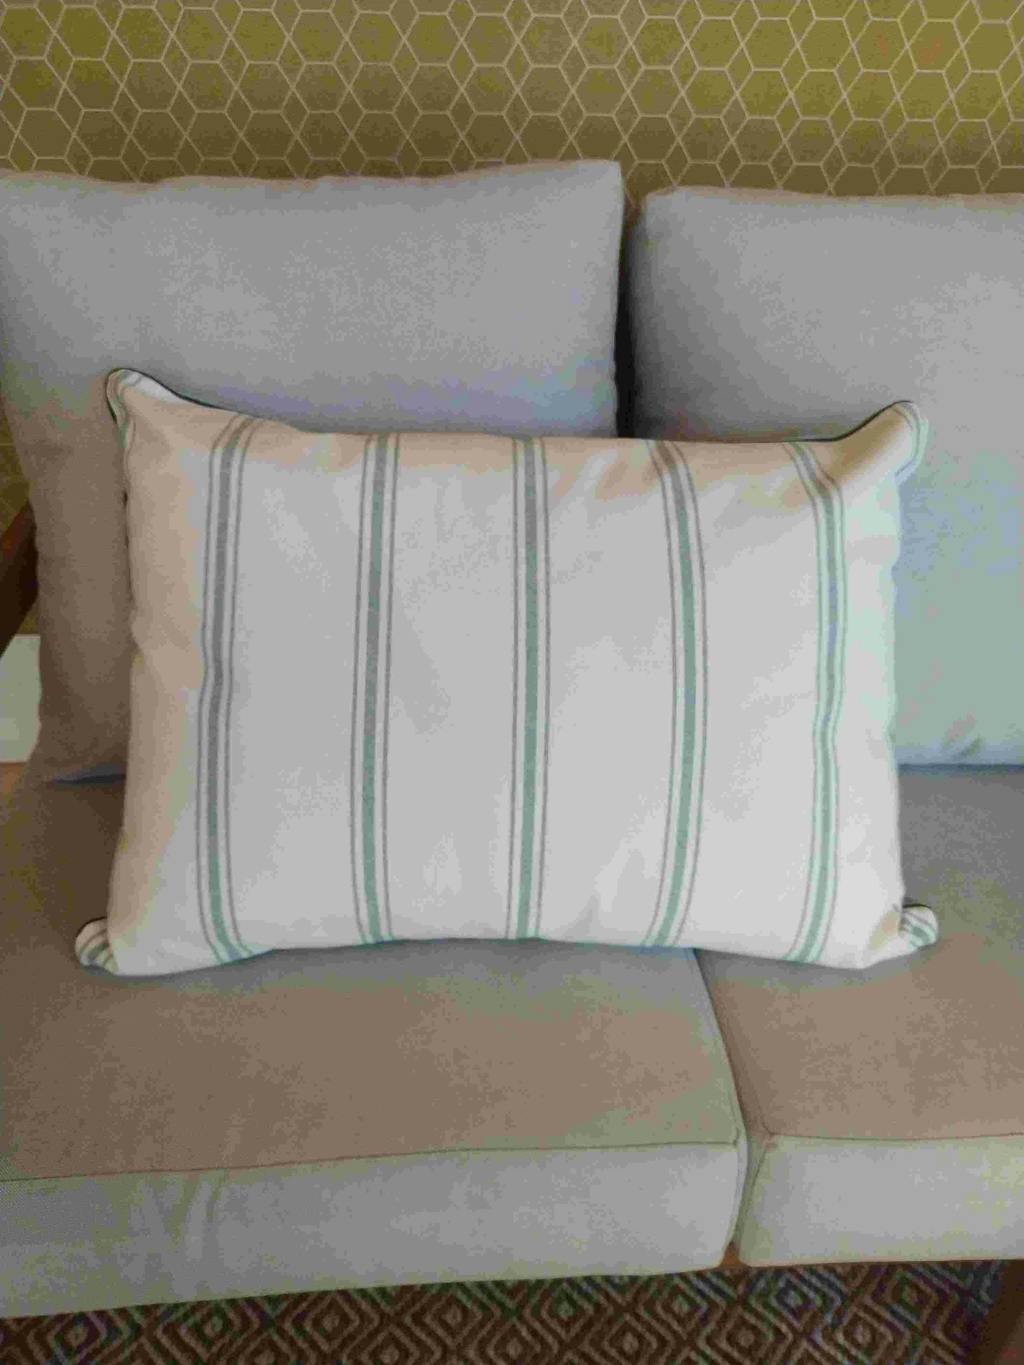 Double-sided rectangular cushion. Linen fabric with a mint green striped finish.